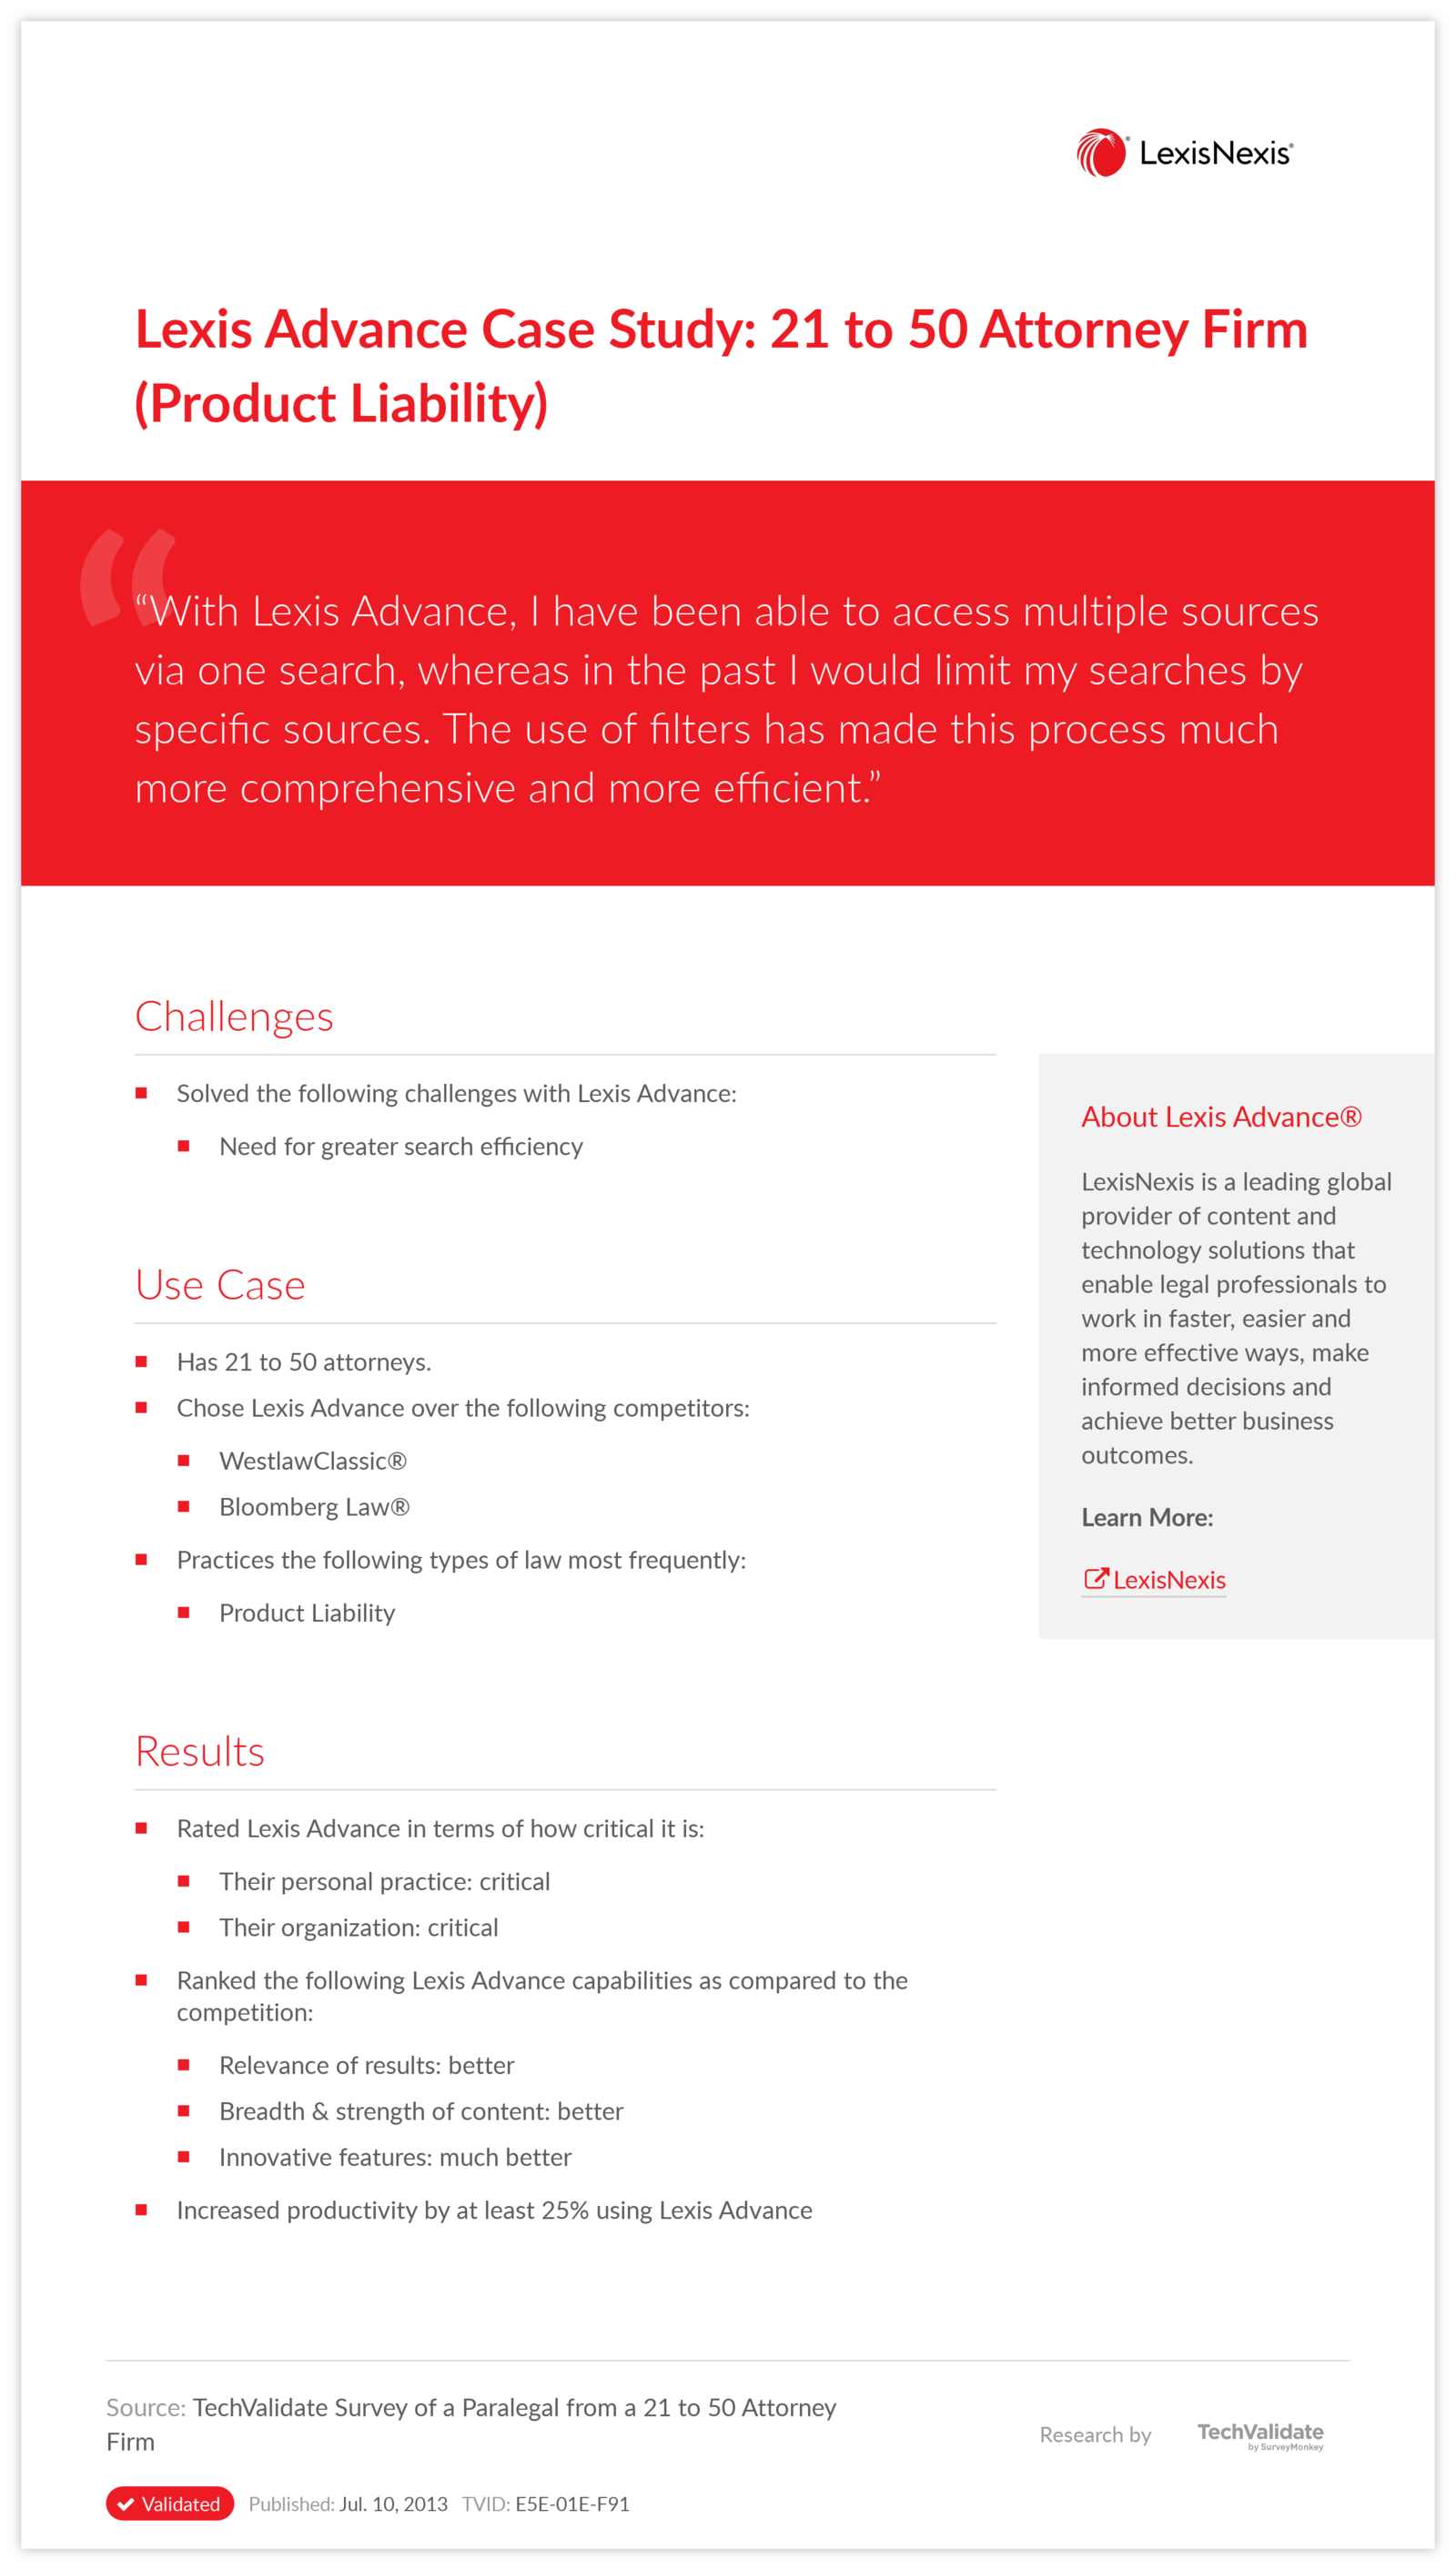 Lexis Advance Case Study: 21 to 50 Attorney Firm (Product Liability)